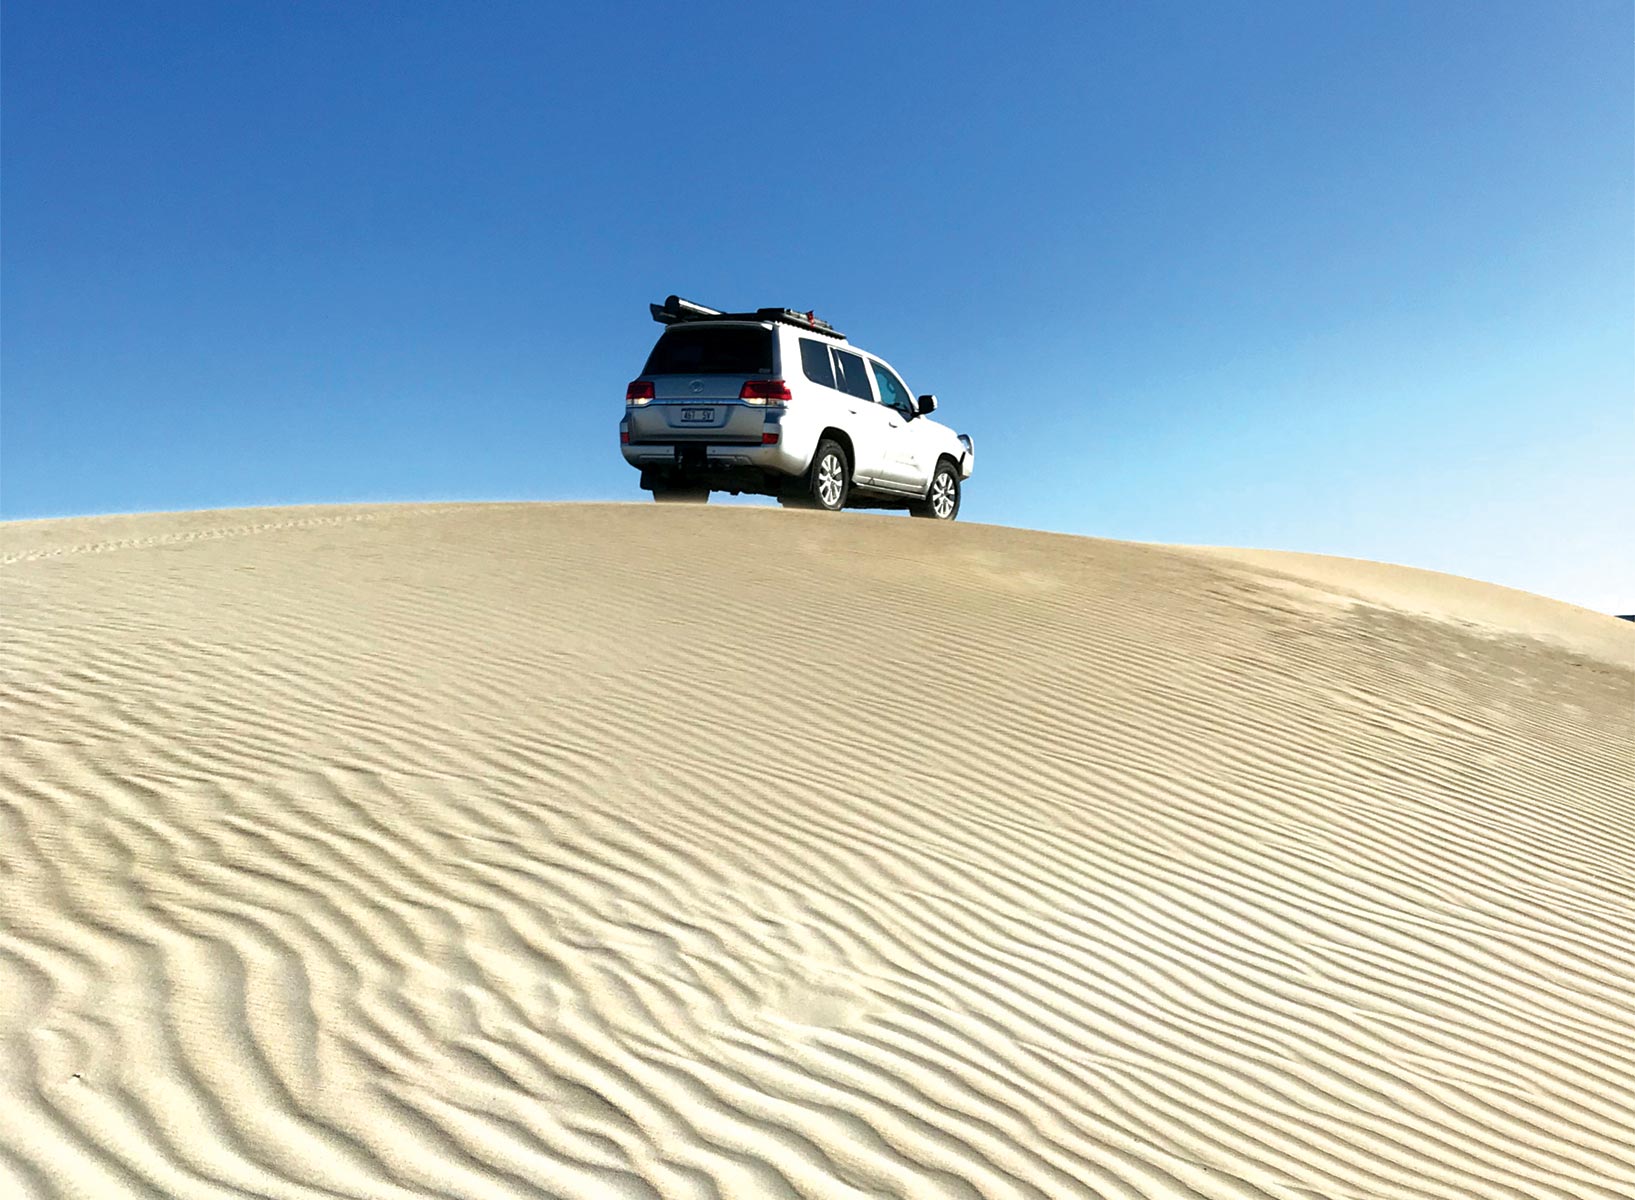 Fowlers Bay 4WD in sand dunes